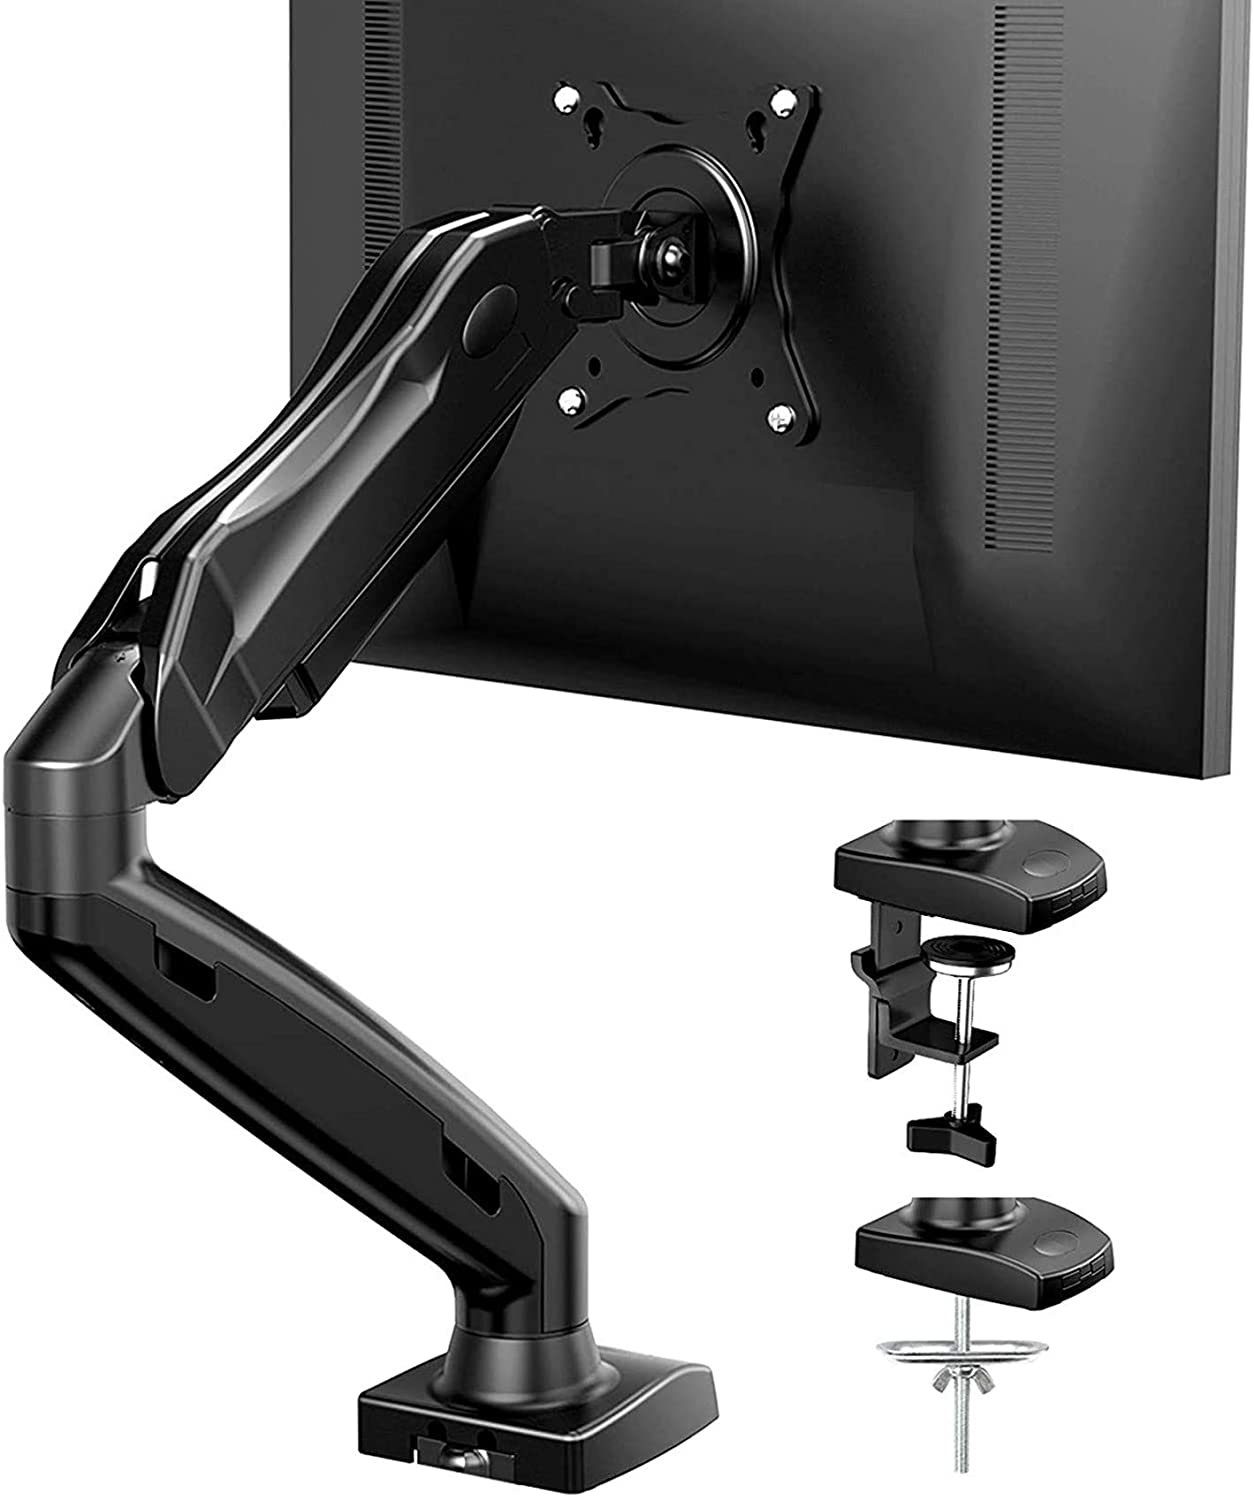 Articulating Gas Spring Monitor Arm, Adjustable Vesa Mount Desk Stand with Clamp and Grommet Base - Fits 17 to 27 Inch LCD Computer Monitors 4.4 to 14.3lbs $25.19+FS